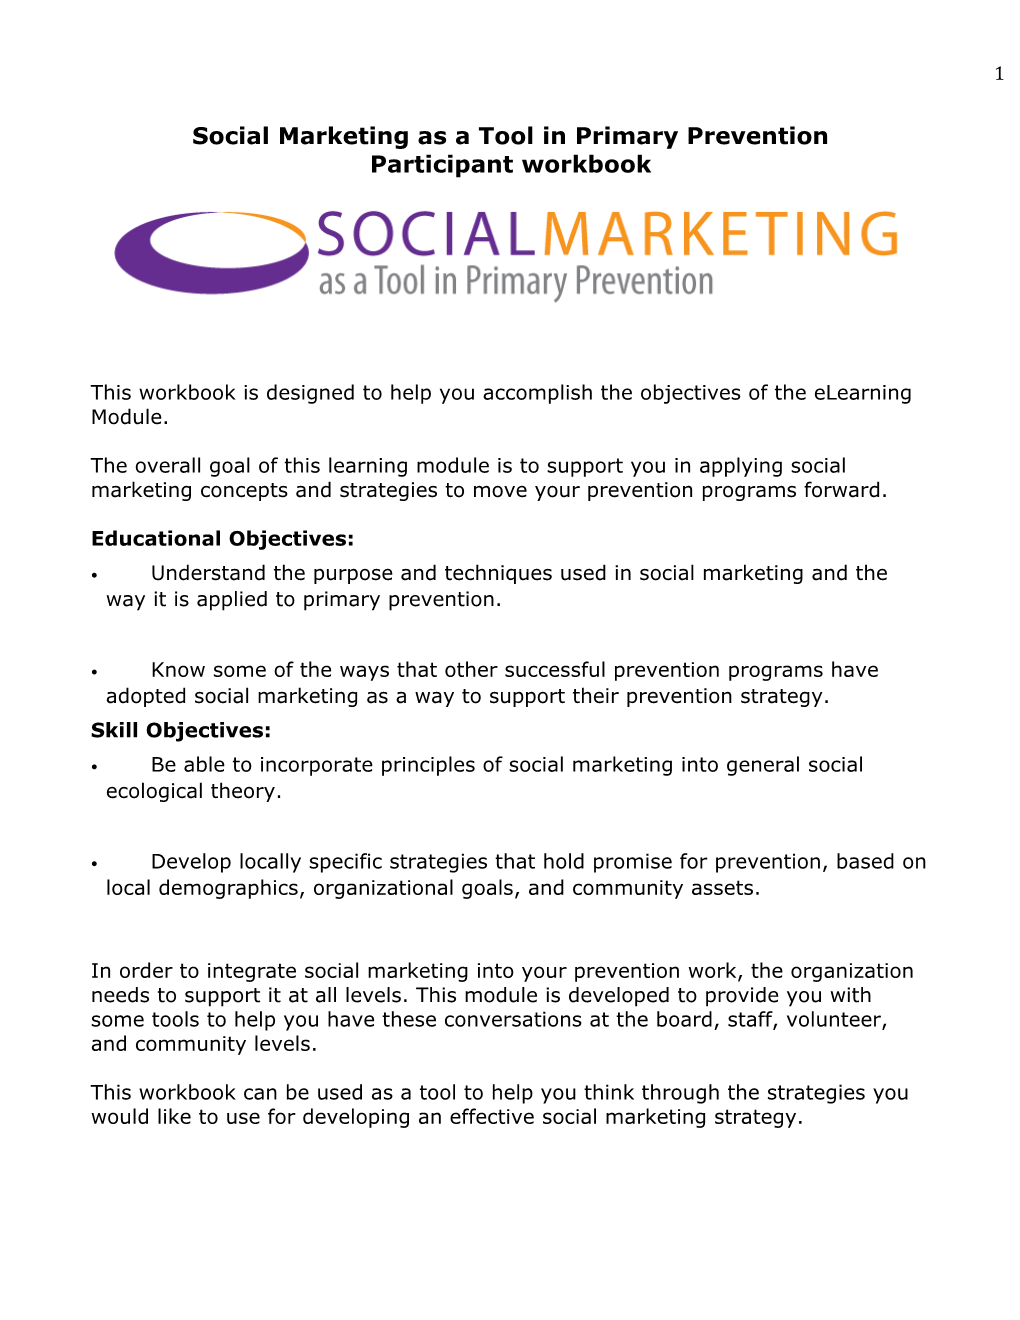 Social Marketing As a Tool in Primary Prevention